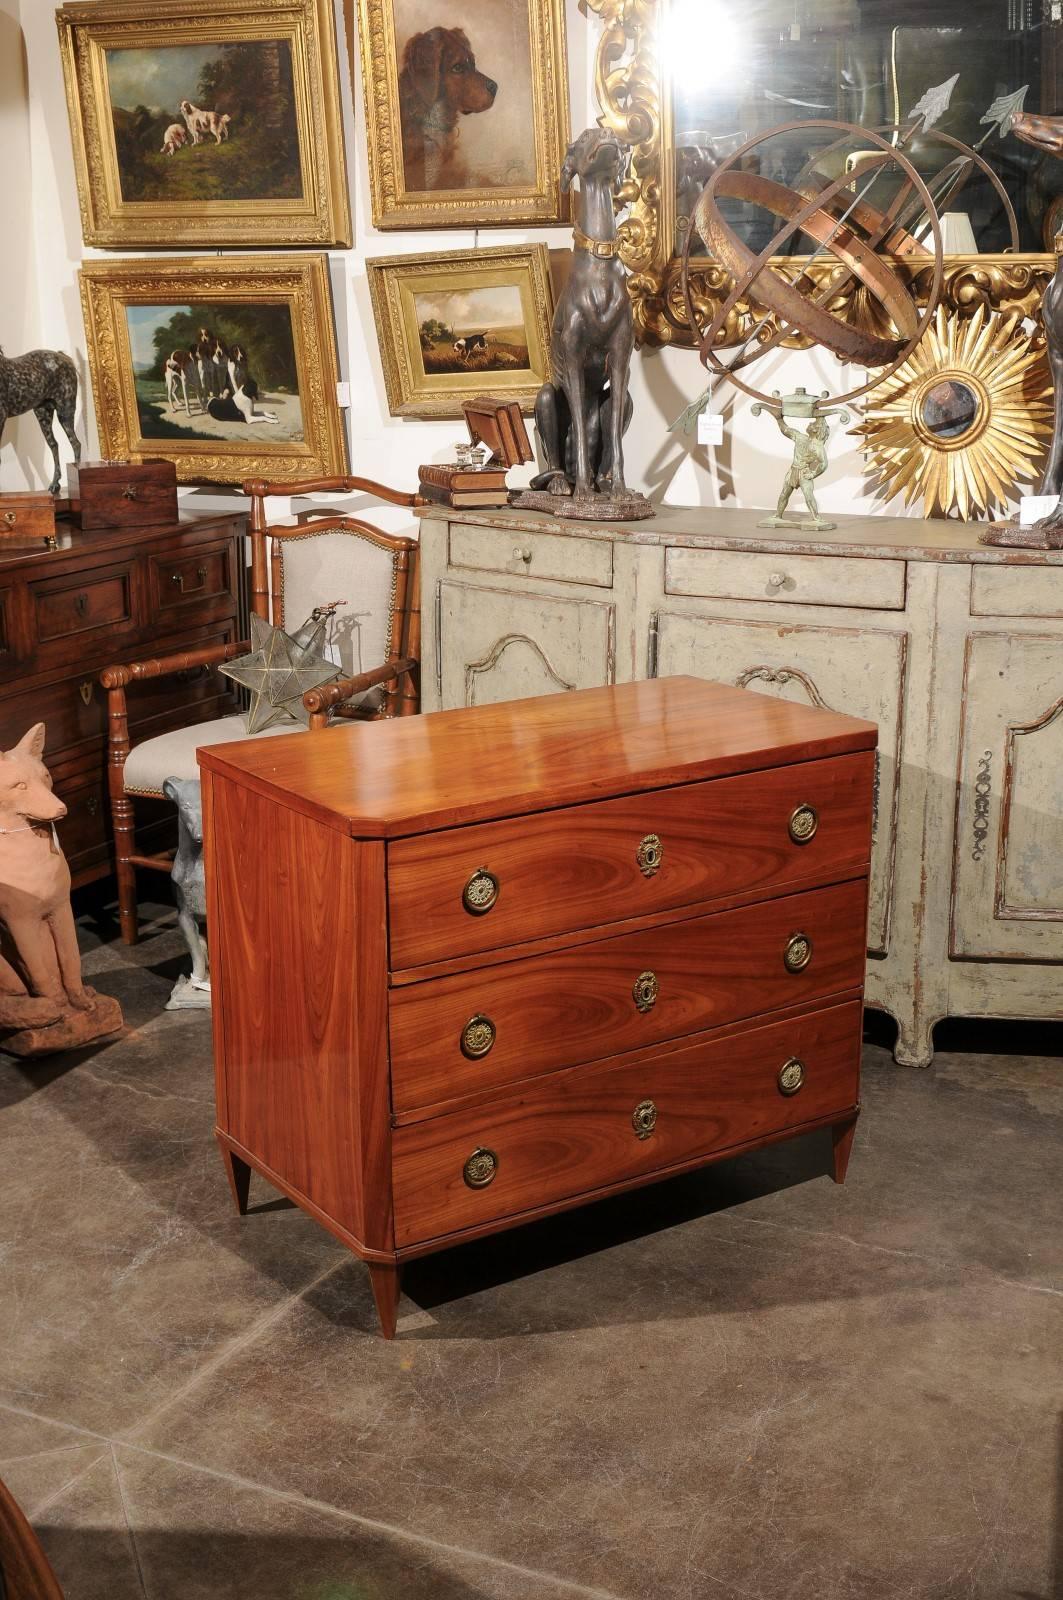 An Austrian Biedermeier period three-drawer commode from the mid-19th century. This Biedermeier chest features a rectangular top with canted corners in the front, above three dovetailed drawers. Each drawer is adorned with brass ring pulls and